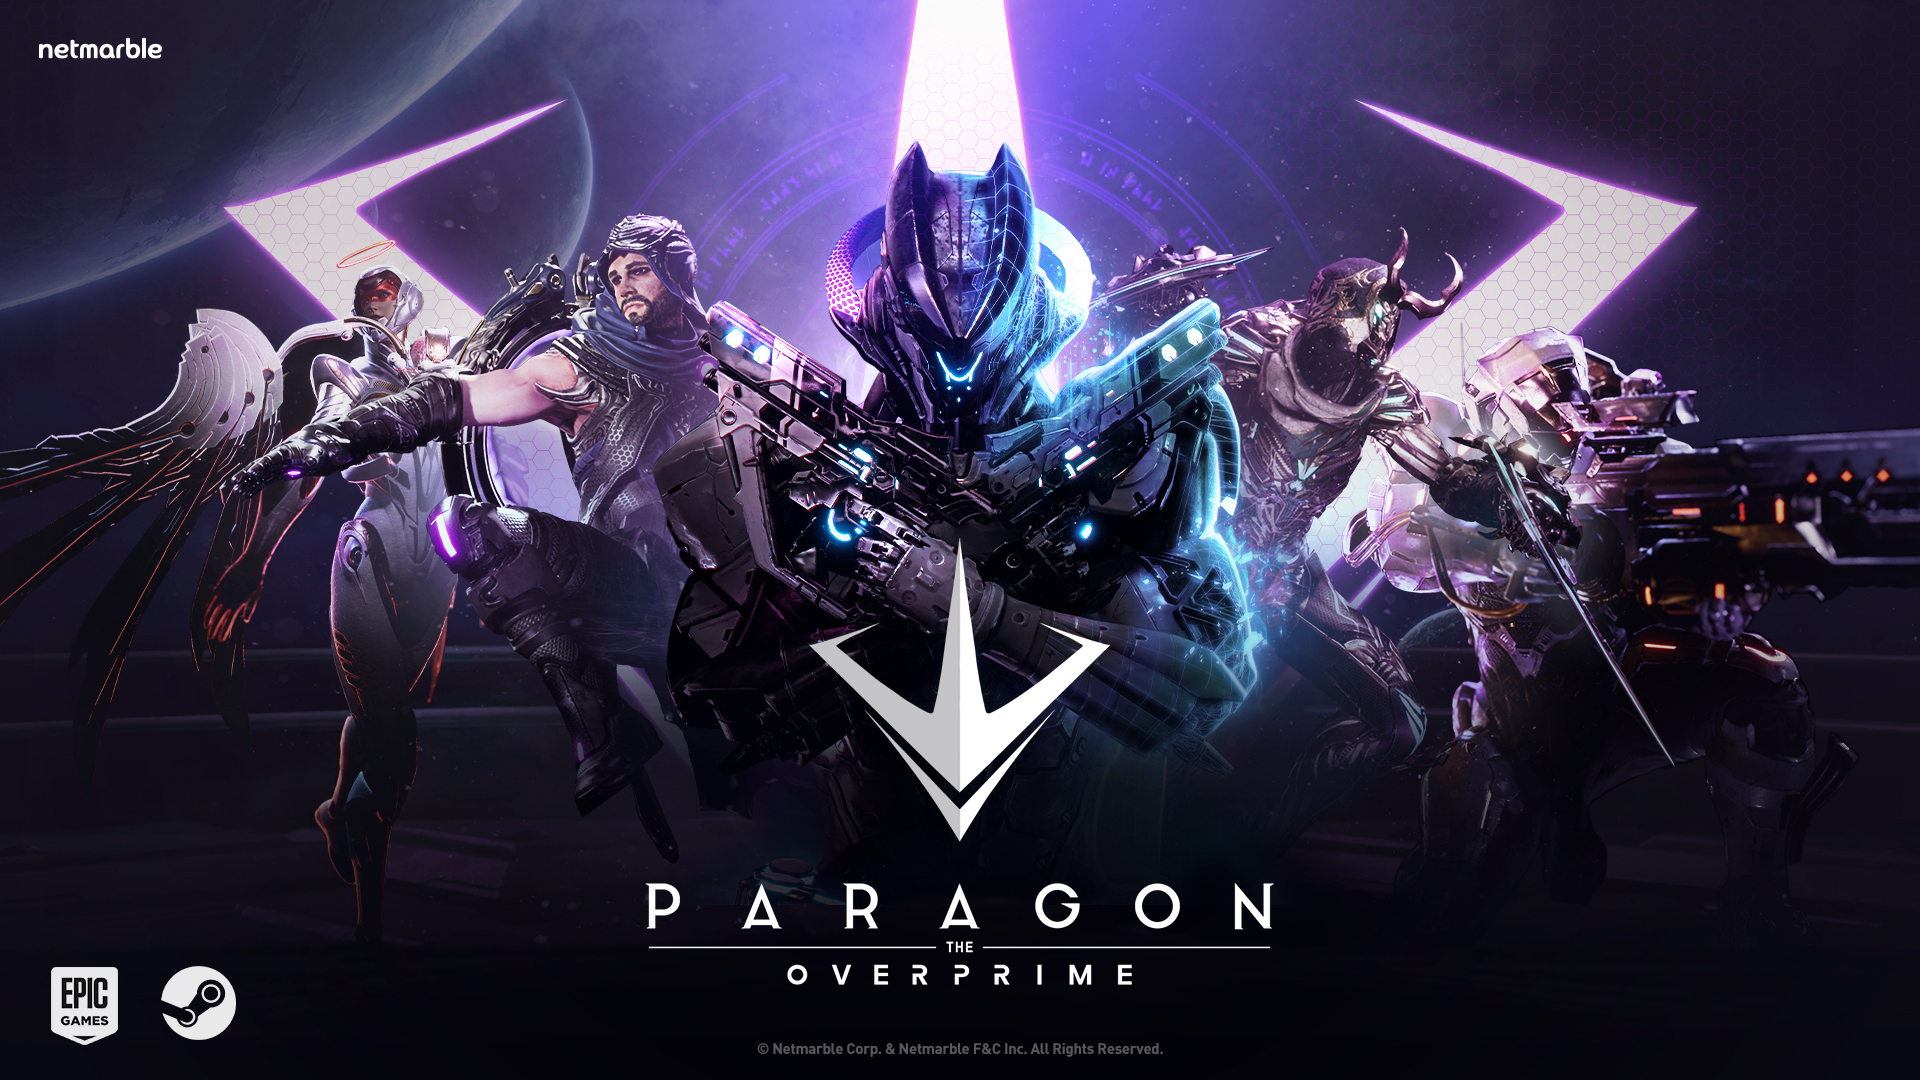 Paragon: The Overprime Project Director: The biggest challenge is